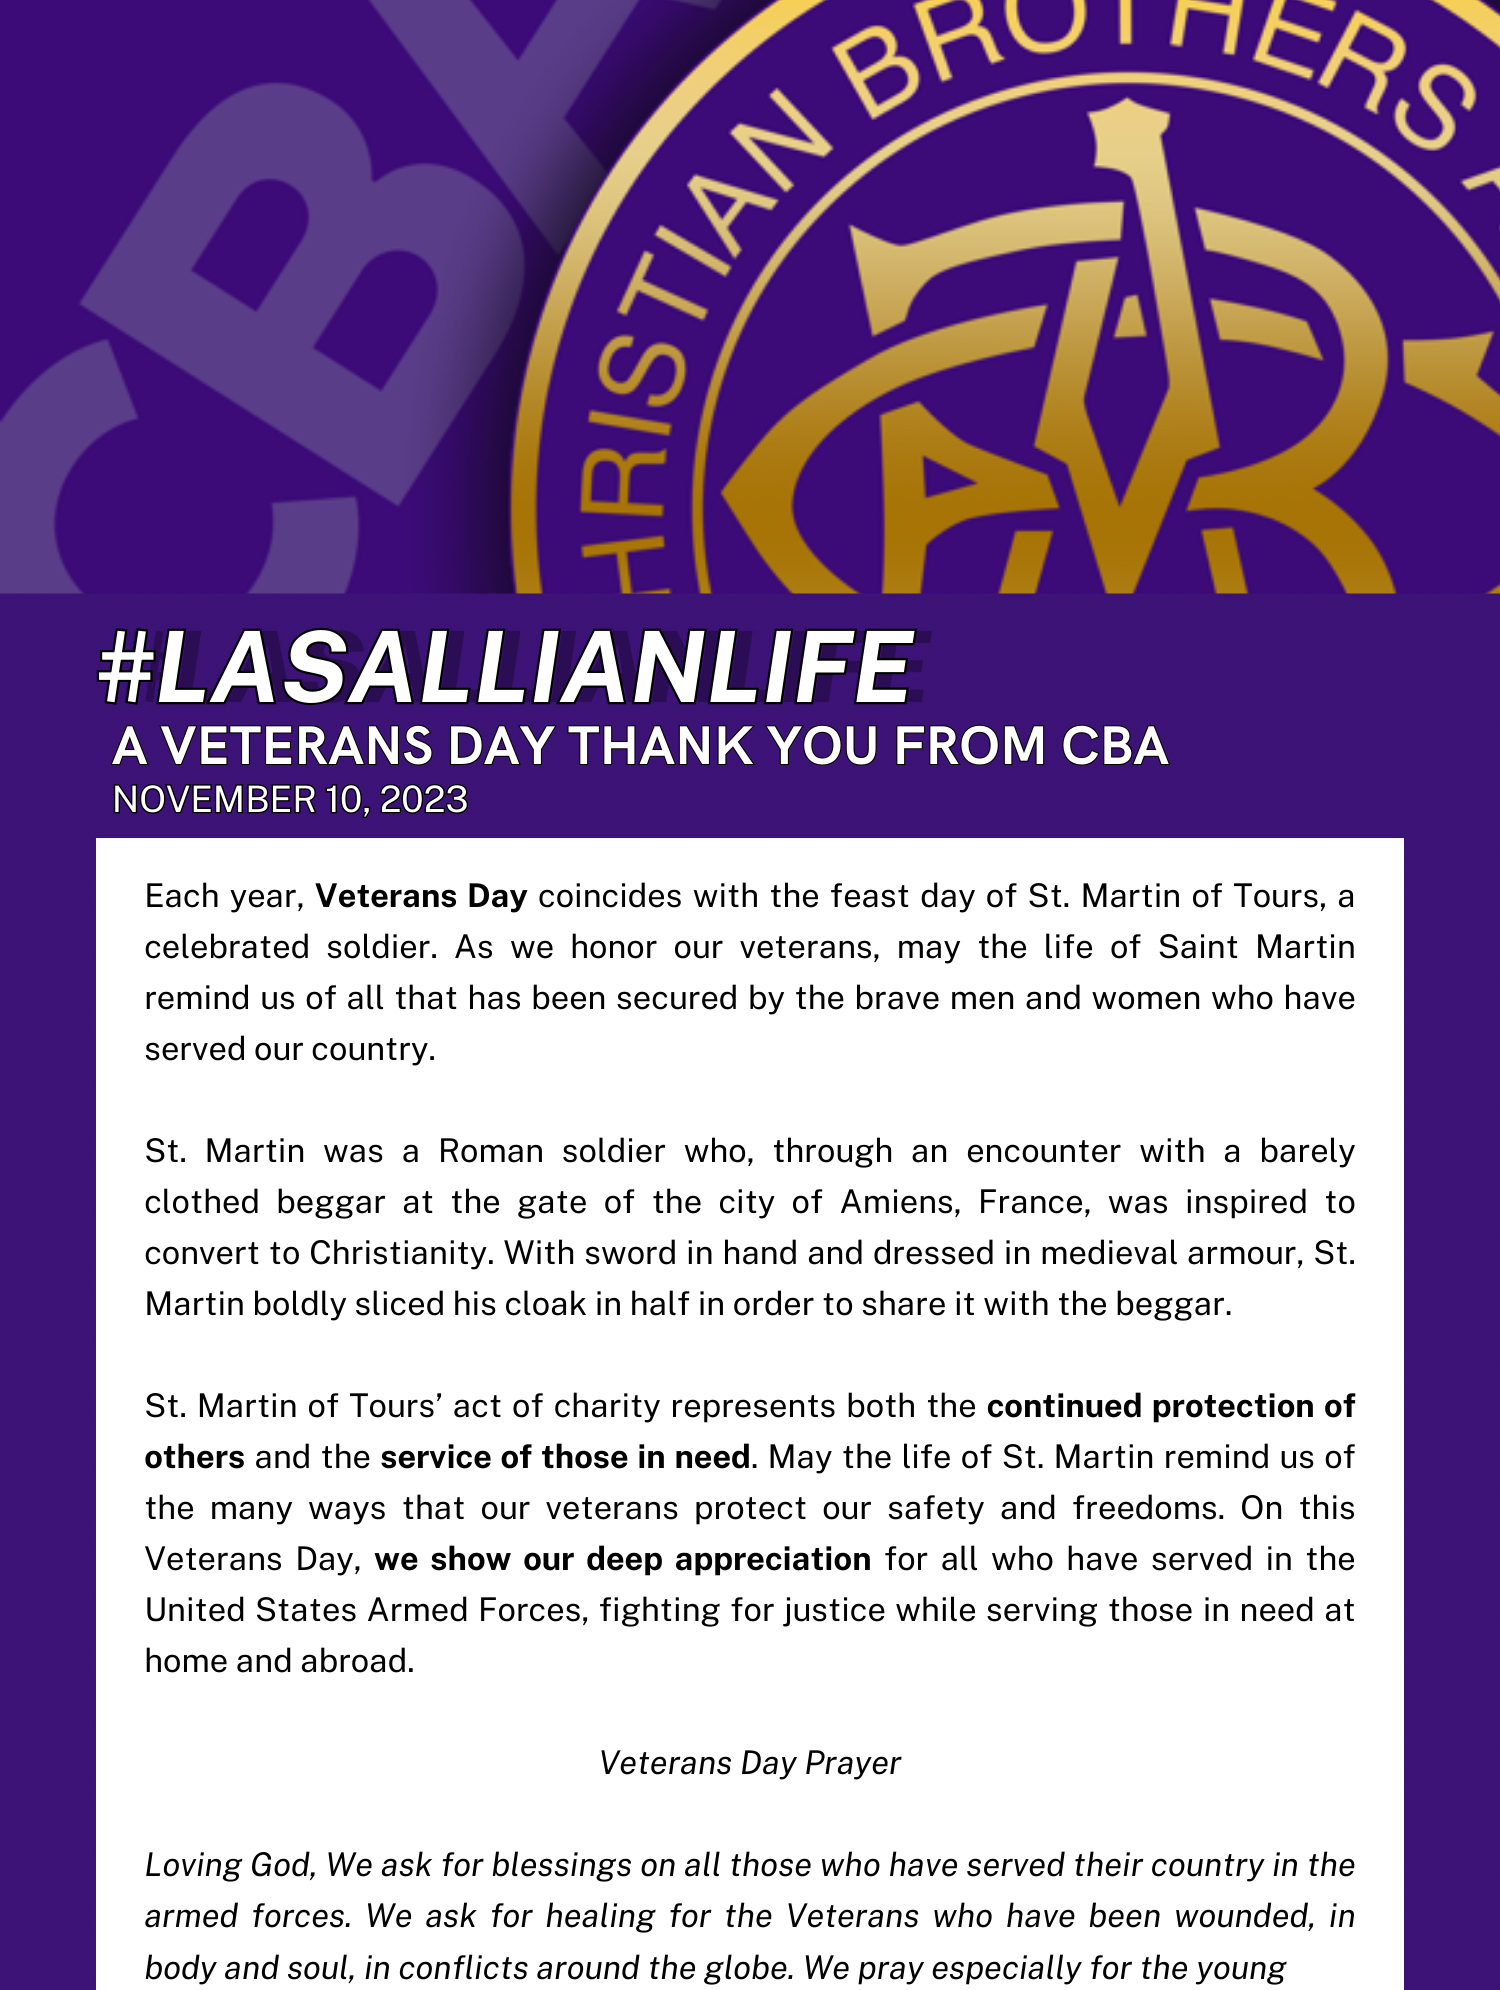 #LasallianLife : A Veterans Day Thank You from CBA